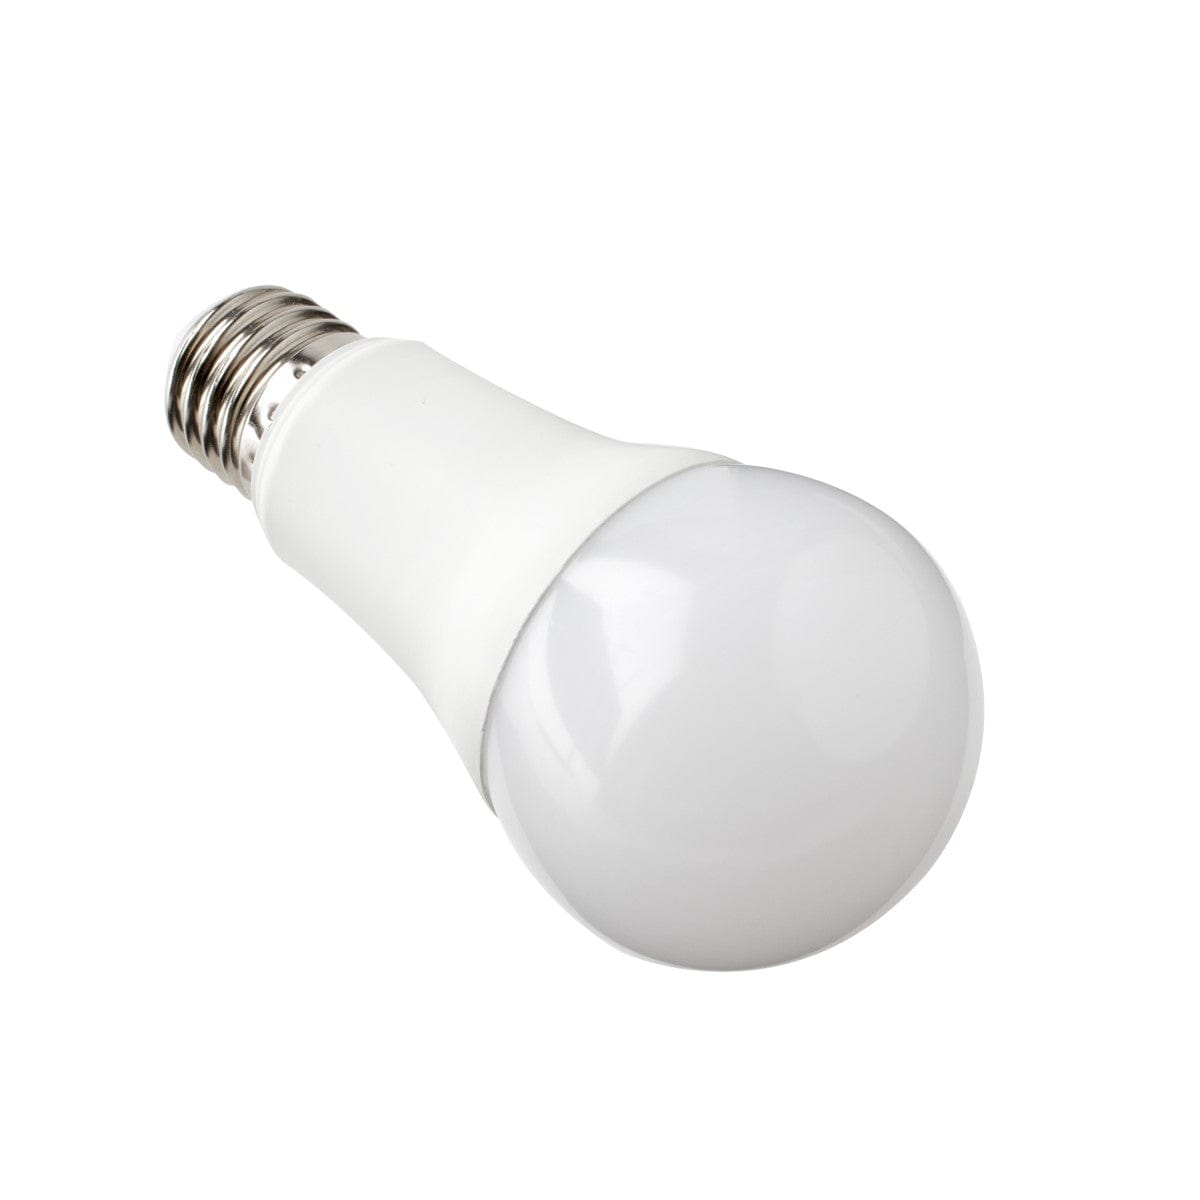 Image of a robus smart light bulb on a white background